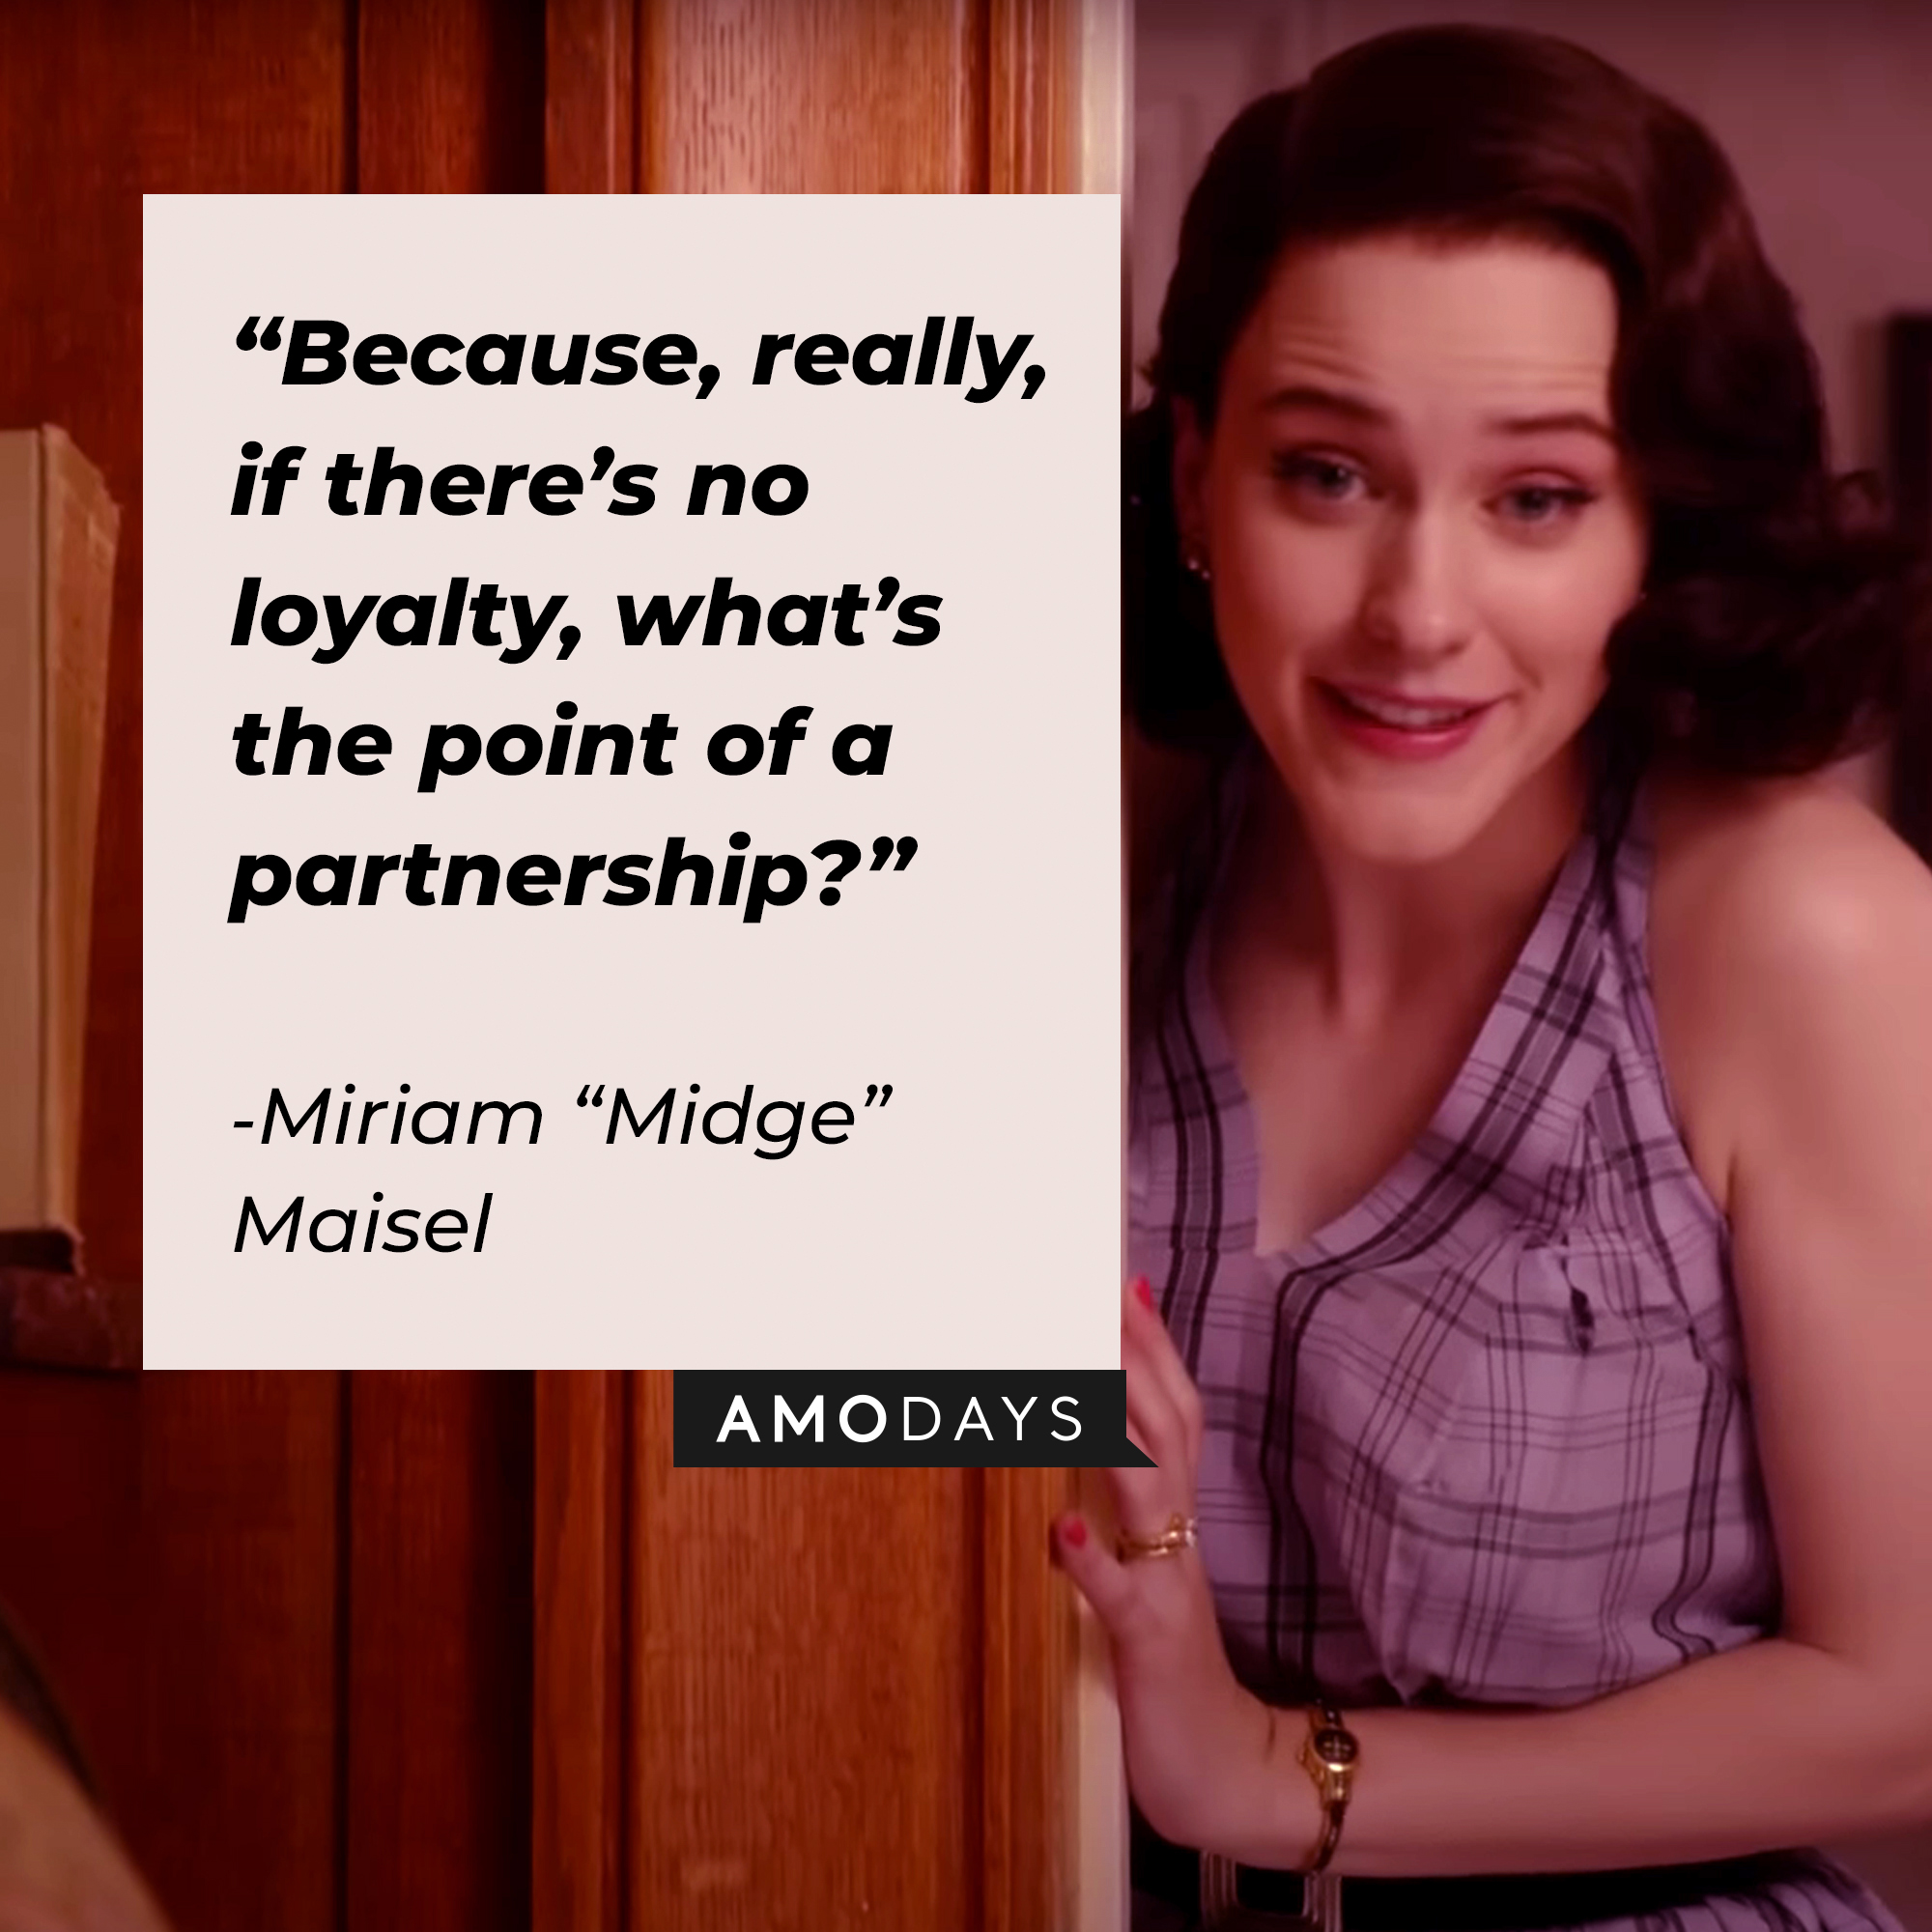 Miriam "Midge" Maisel, with her quote: “Because, really, if there’s no loyalty, what's the point of a partnership?” | Source: youtube.com/PrimeVideoUK